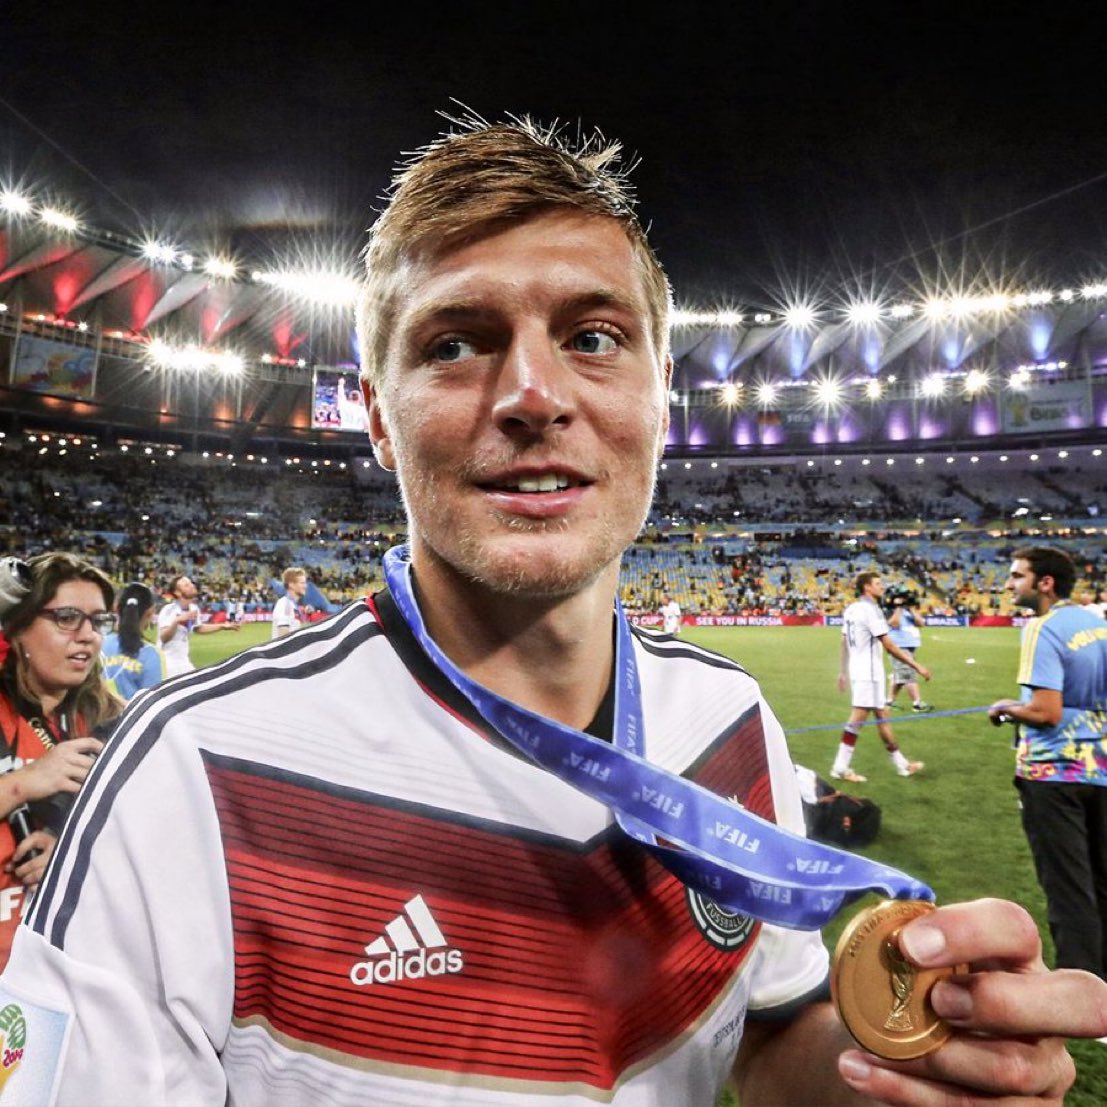 Real Madrid signed 24 year old Toni Kroos coming off a World Cup win in the summer of 2014 for €25M. 

How much would he cost in today’s market?